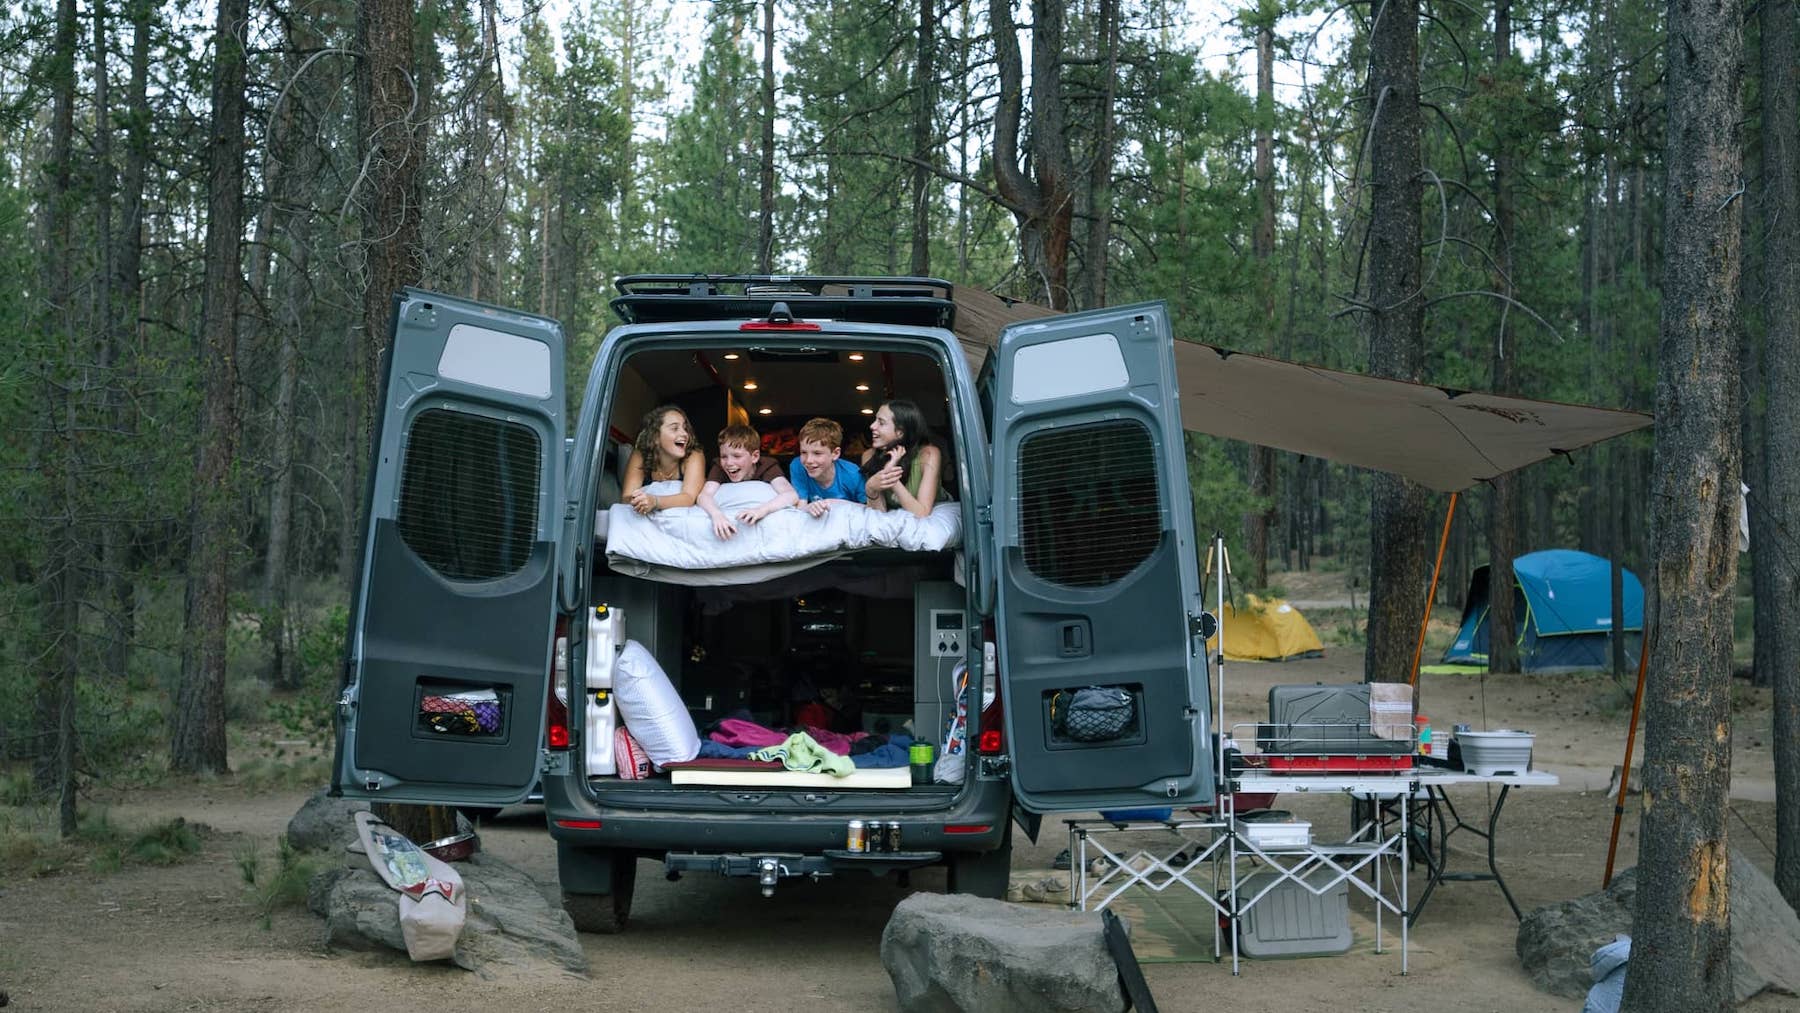 How to Van Life With Kids: Tips and Gear for Family Life on the